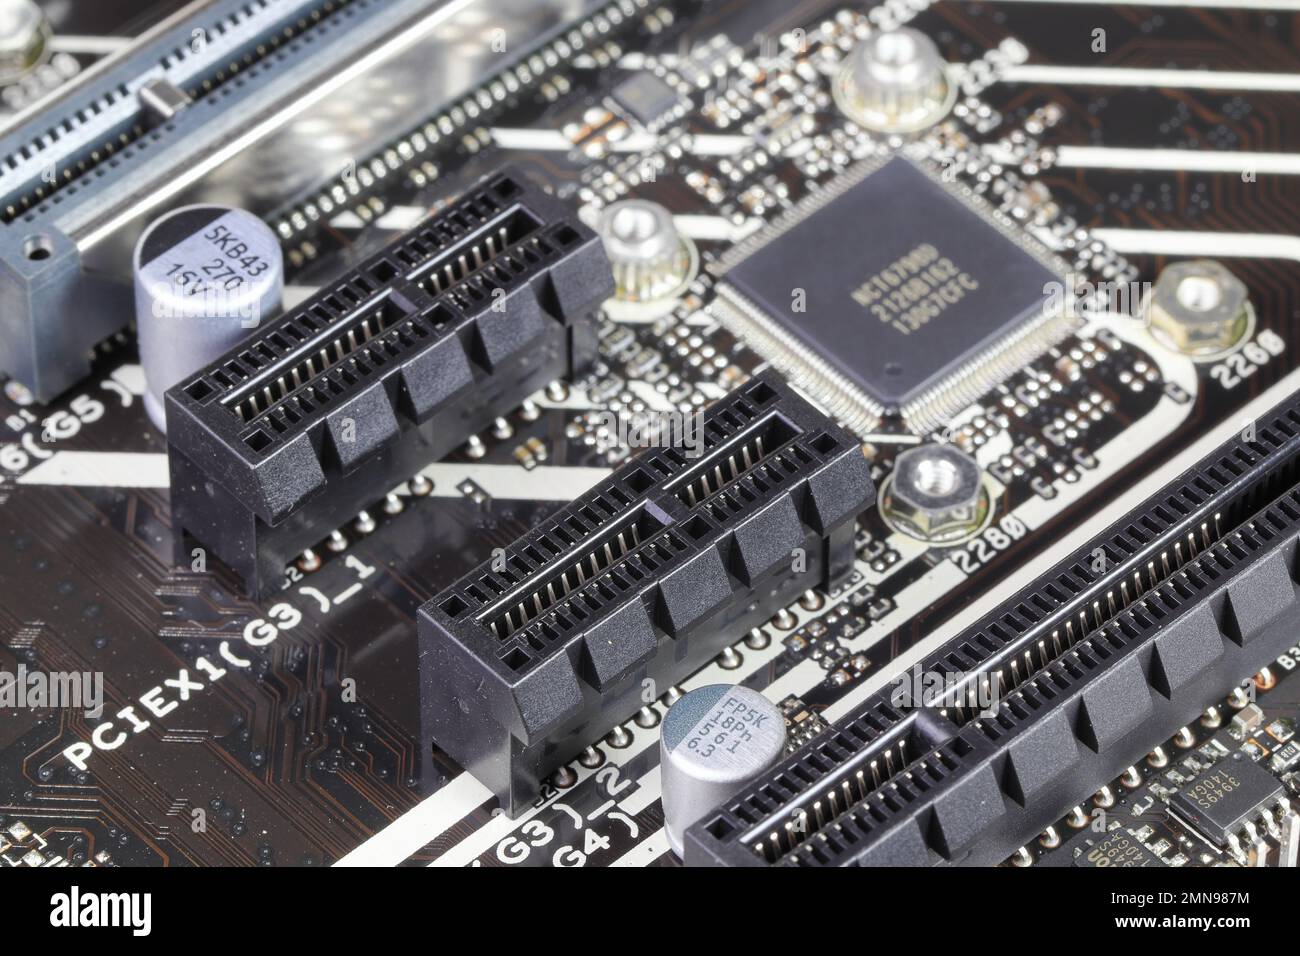 close-up Computer mainboard with pcie x1 and x16 slot on computer mainboard Stock Photo